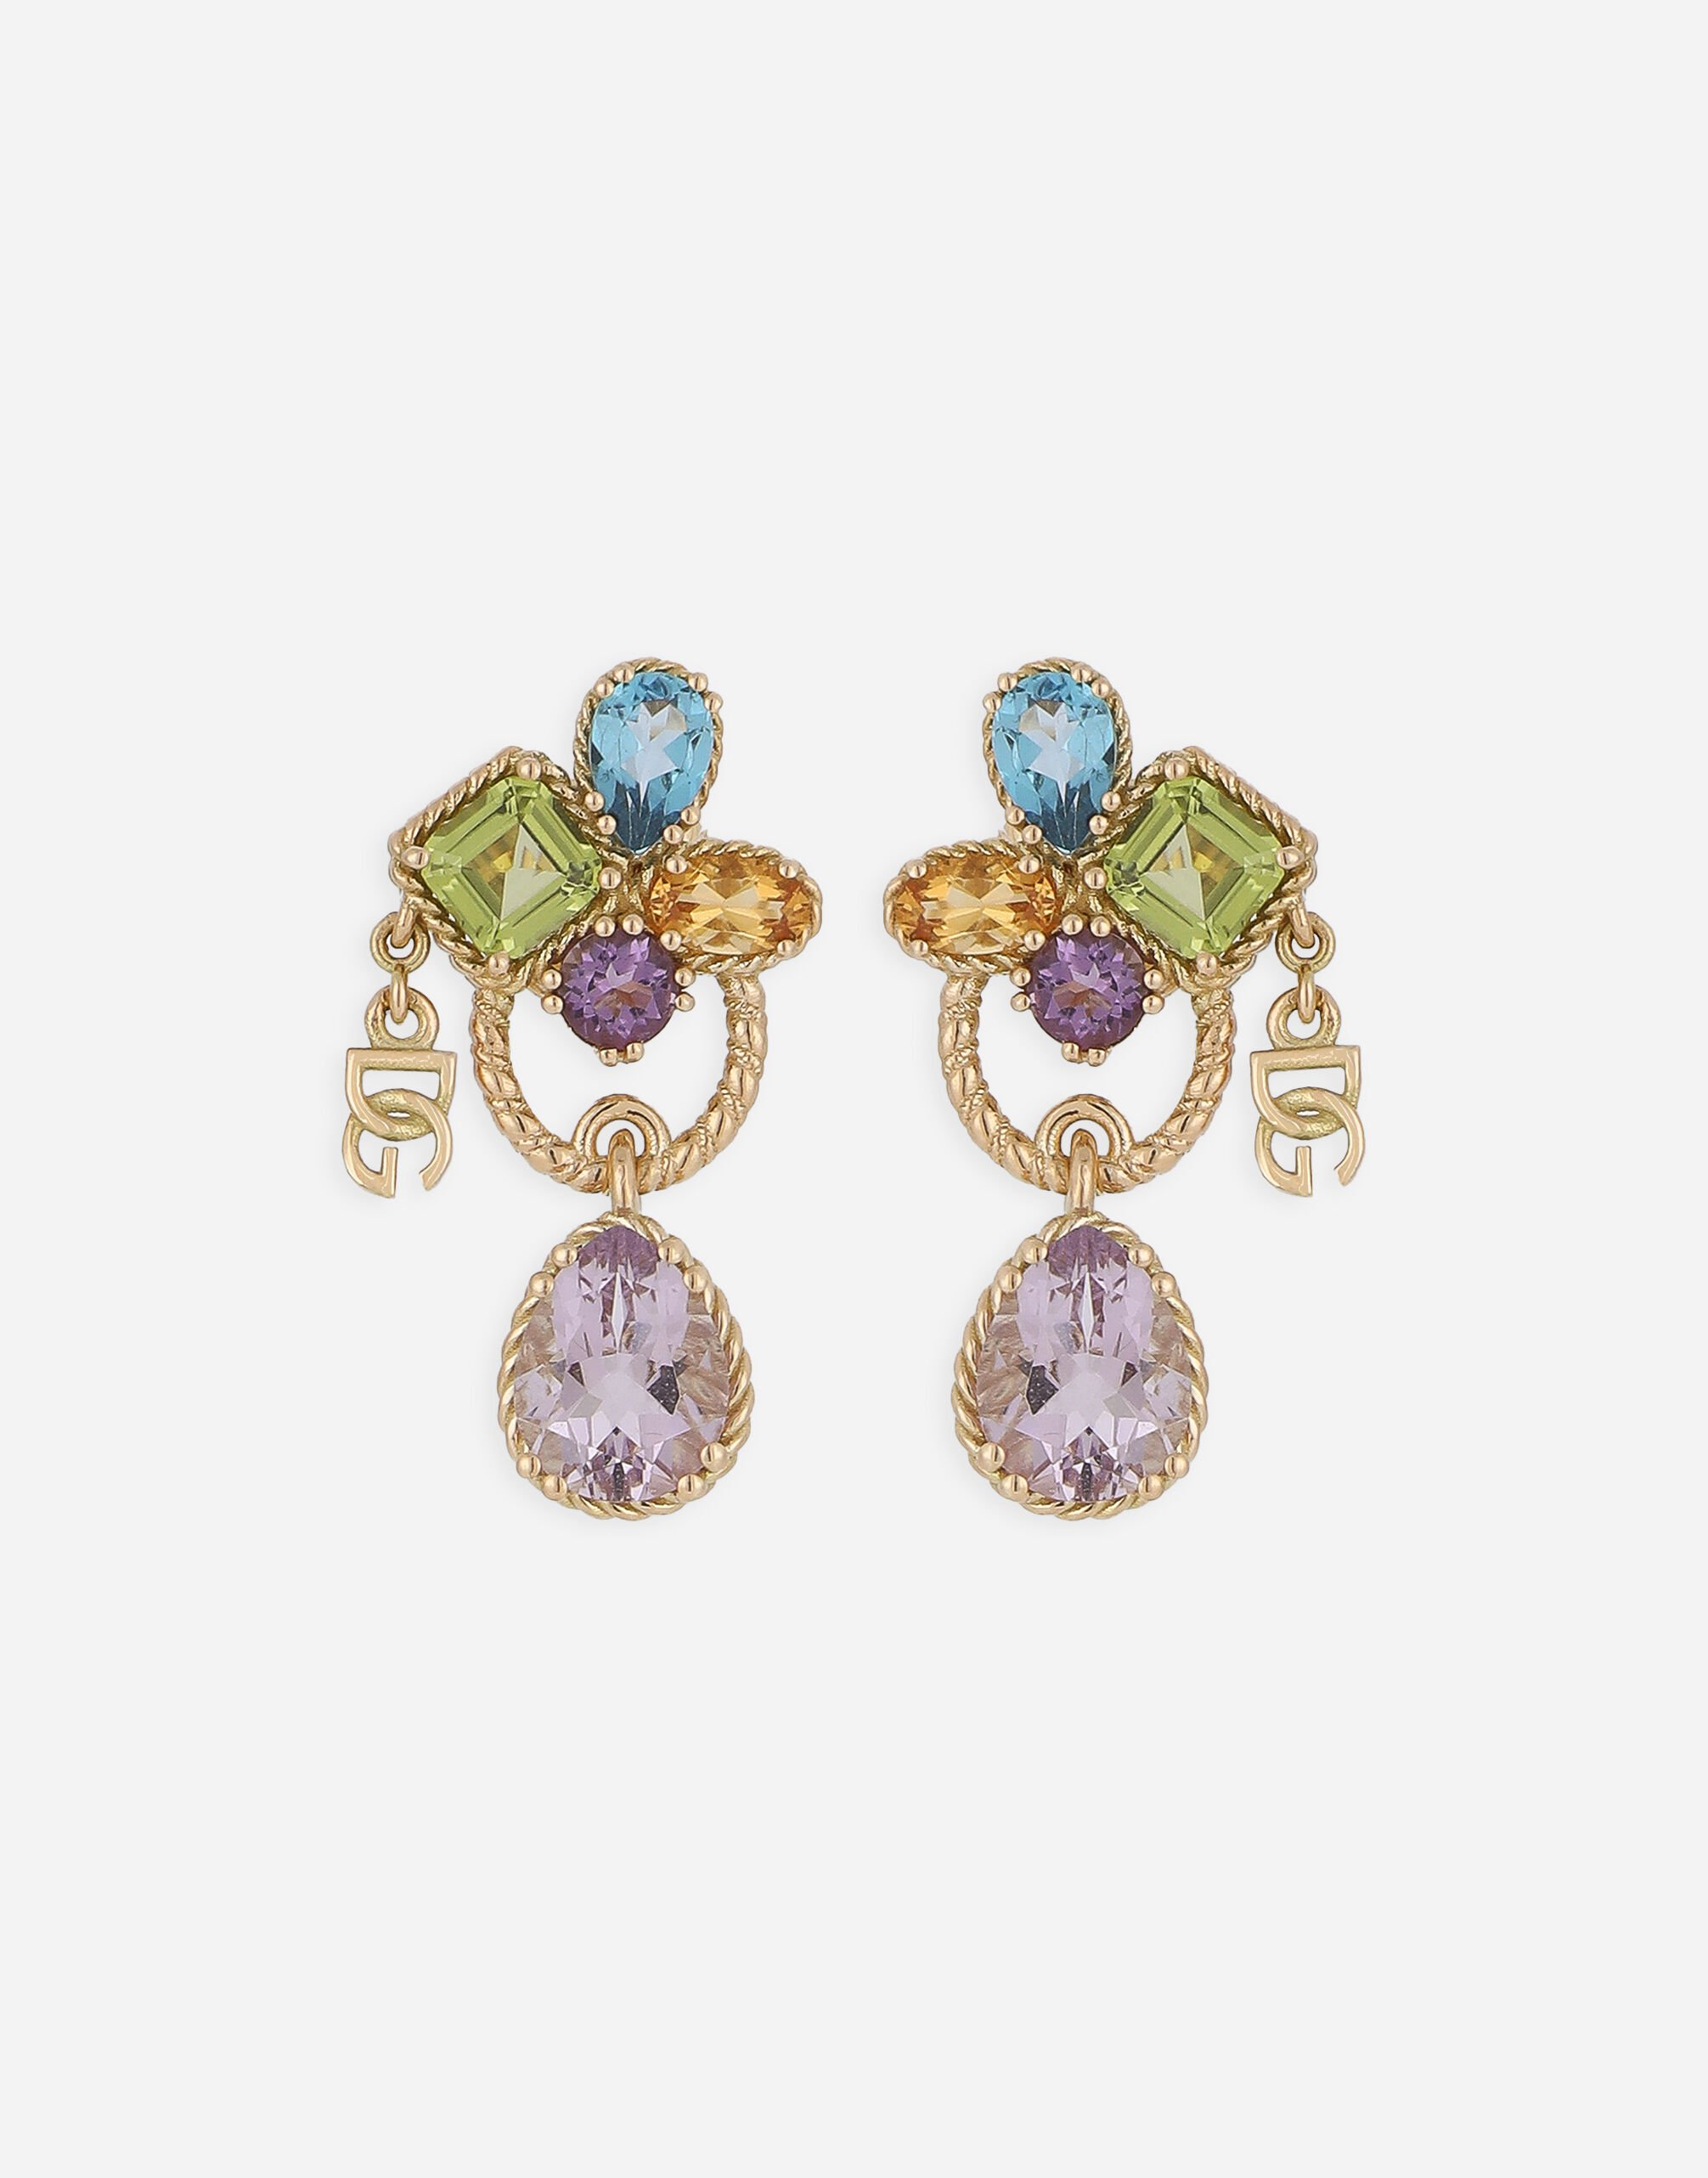 Dolce & Gabbana 18kt yellow gold pierced earrings withmulticolors gemstones White WEQA1GWSPBL